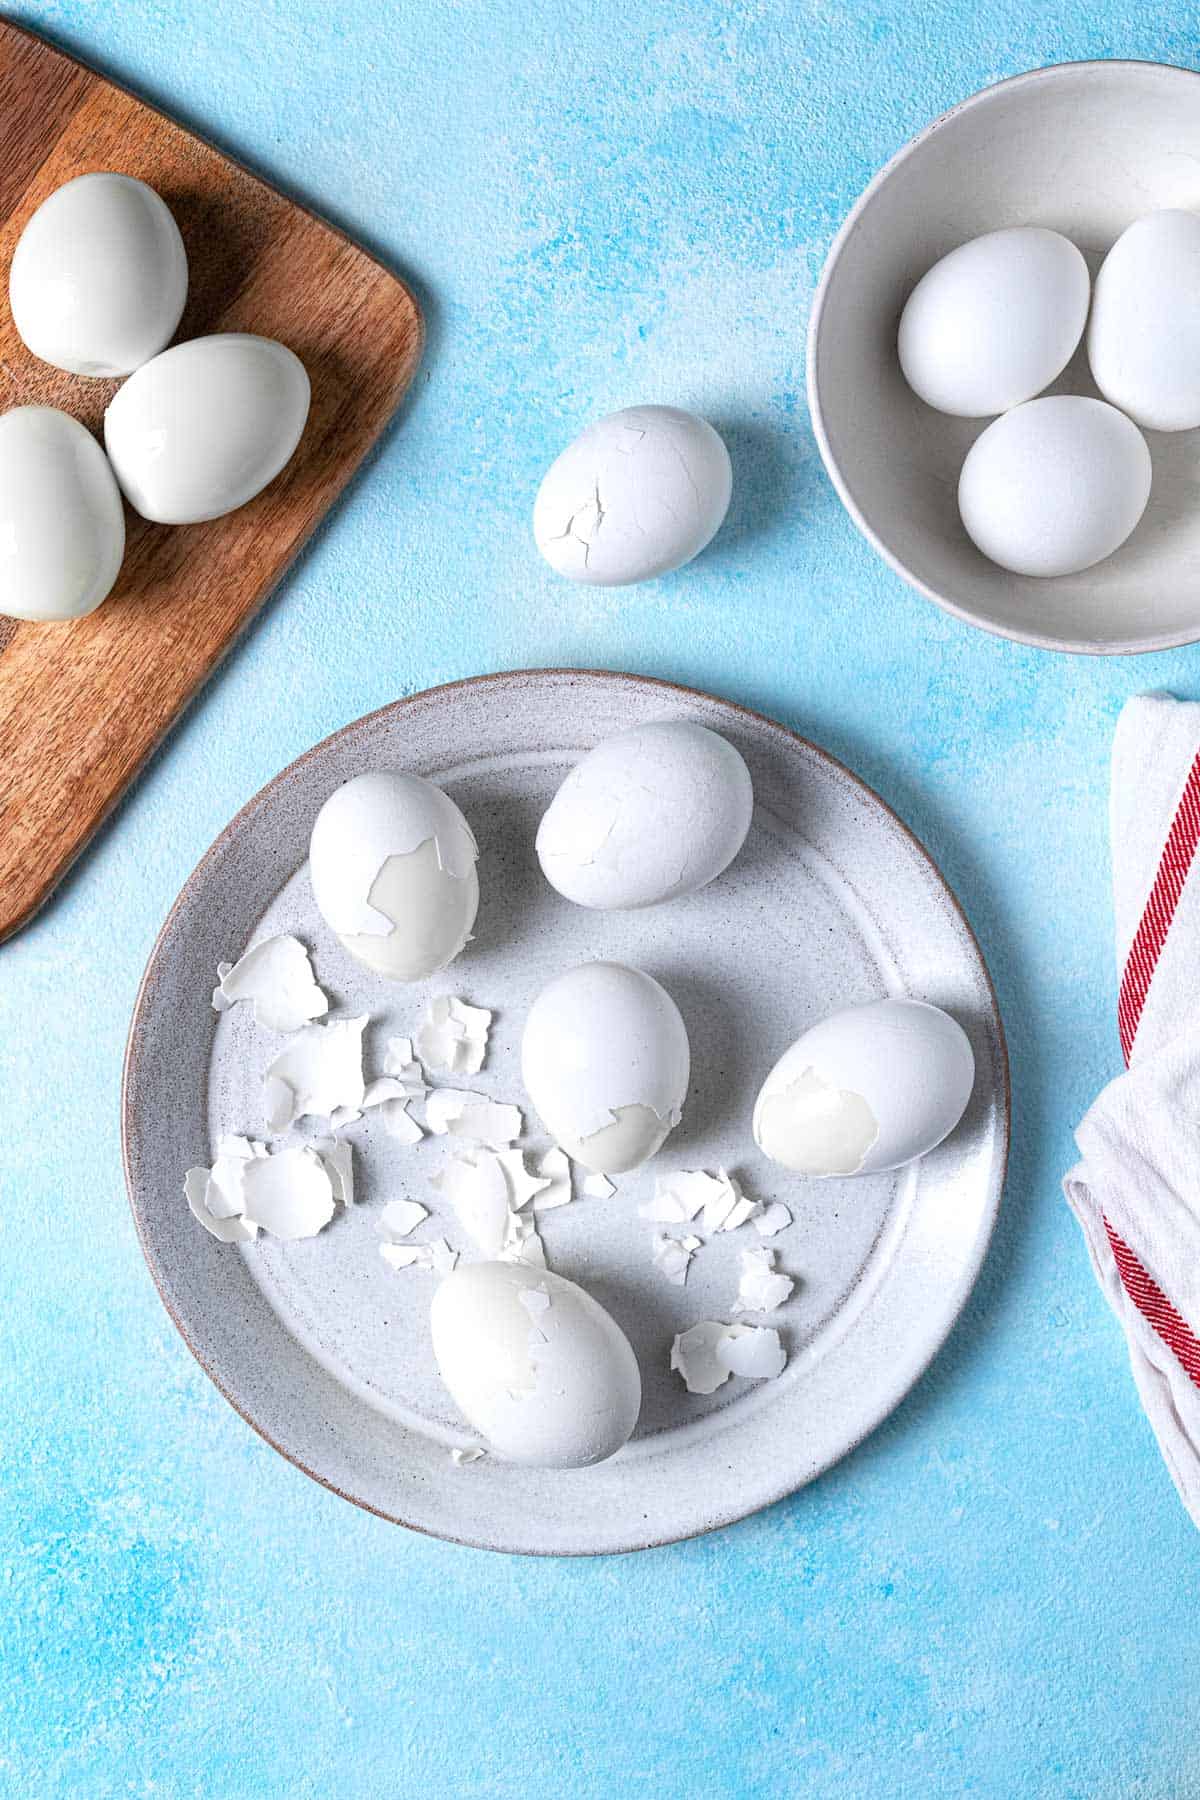 5 partially peeled hard boiled eggs on a plate next to a wooden tray with3 fully peeled eggs and a bowl with 3 unpeeled eggs.